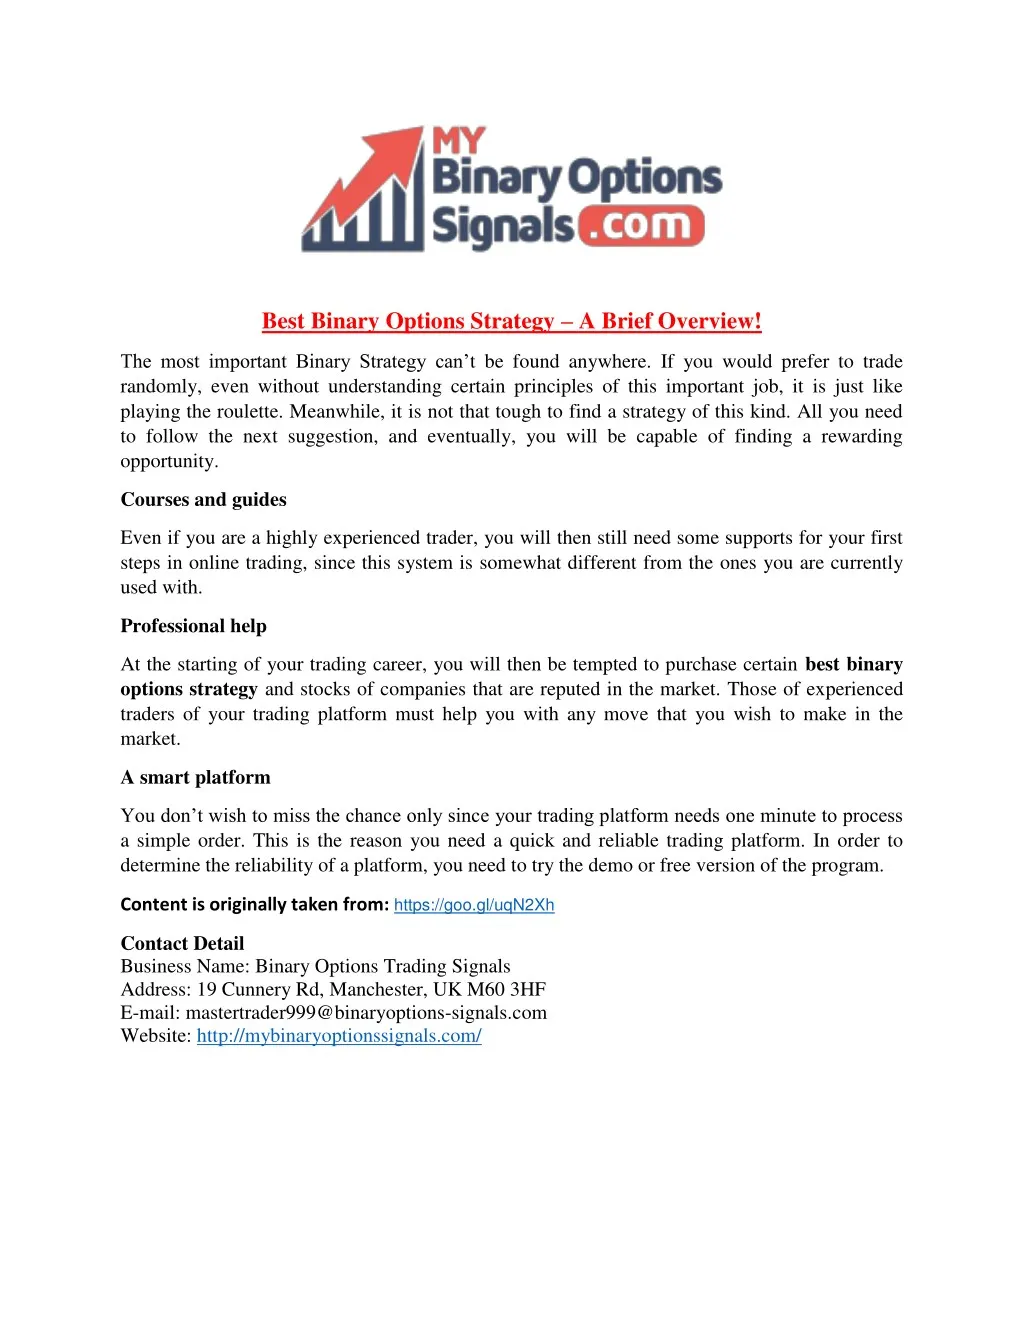 best binary options strategy a brief overview